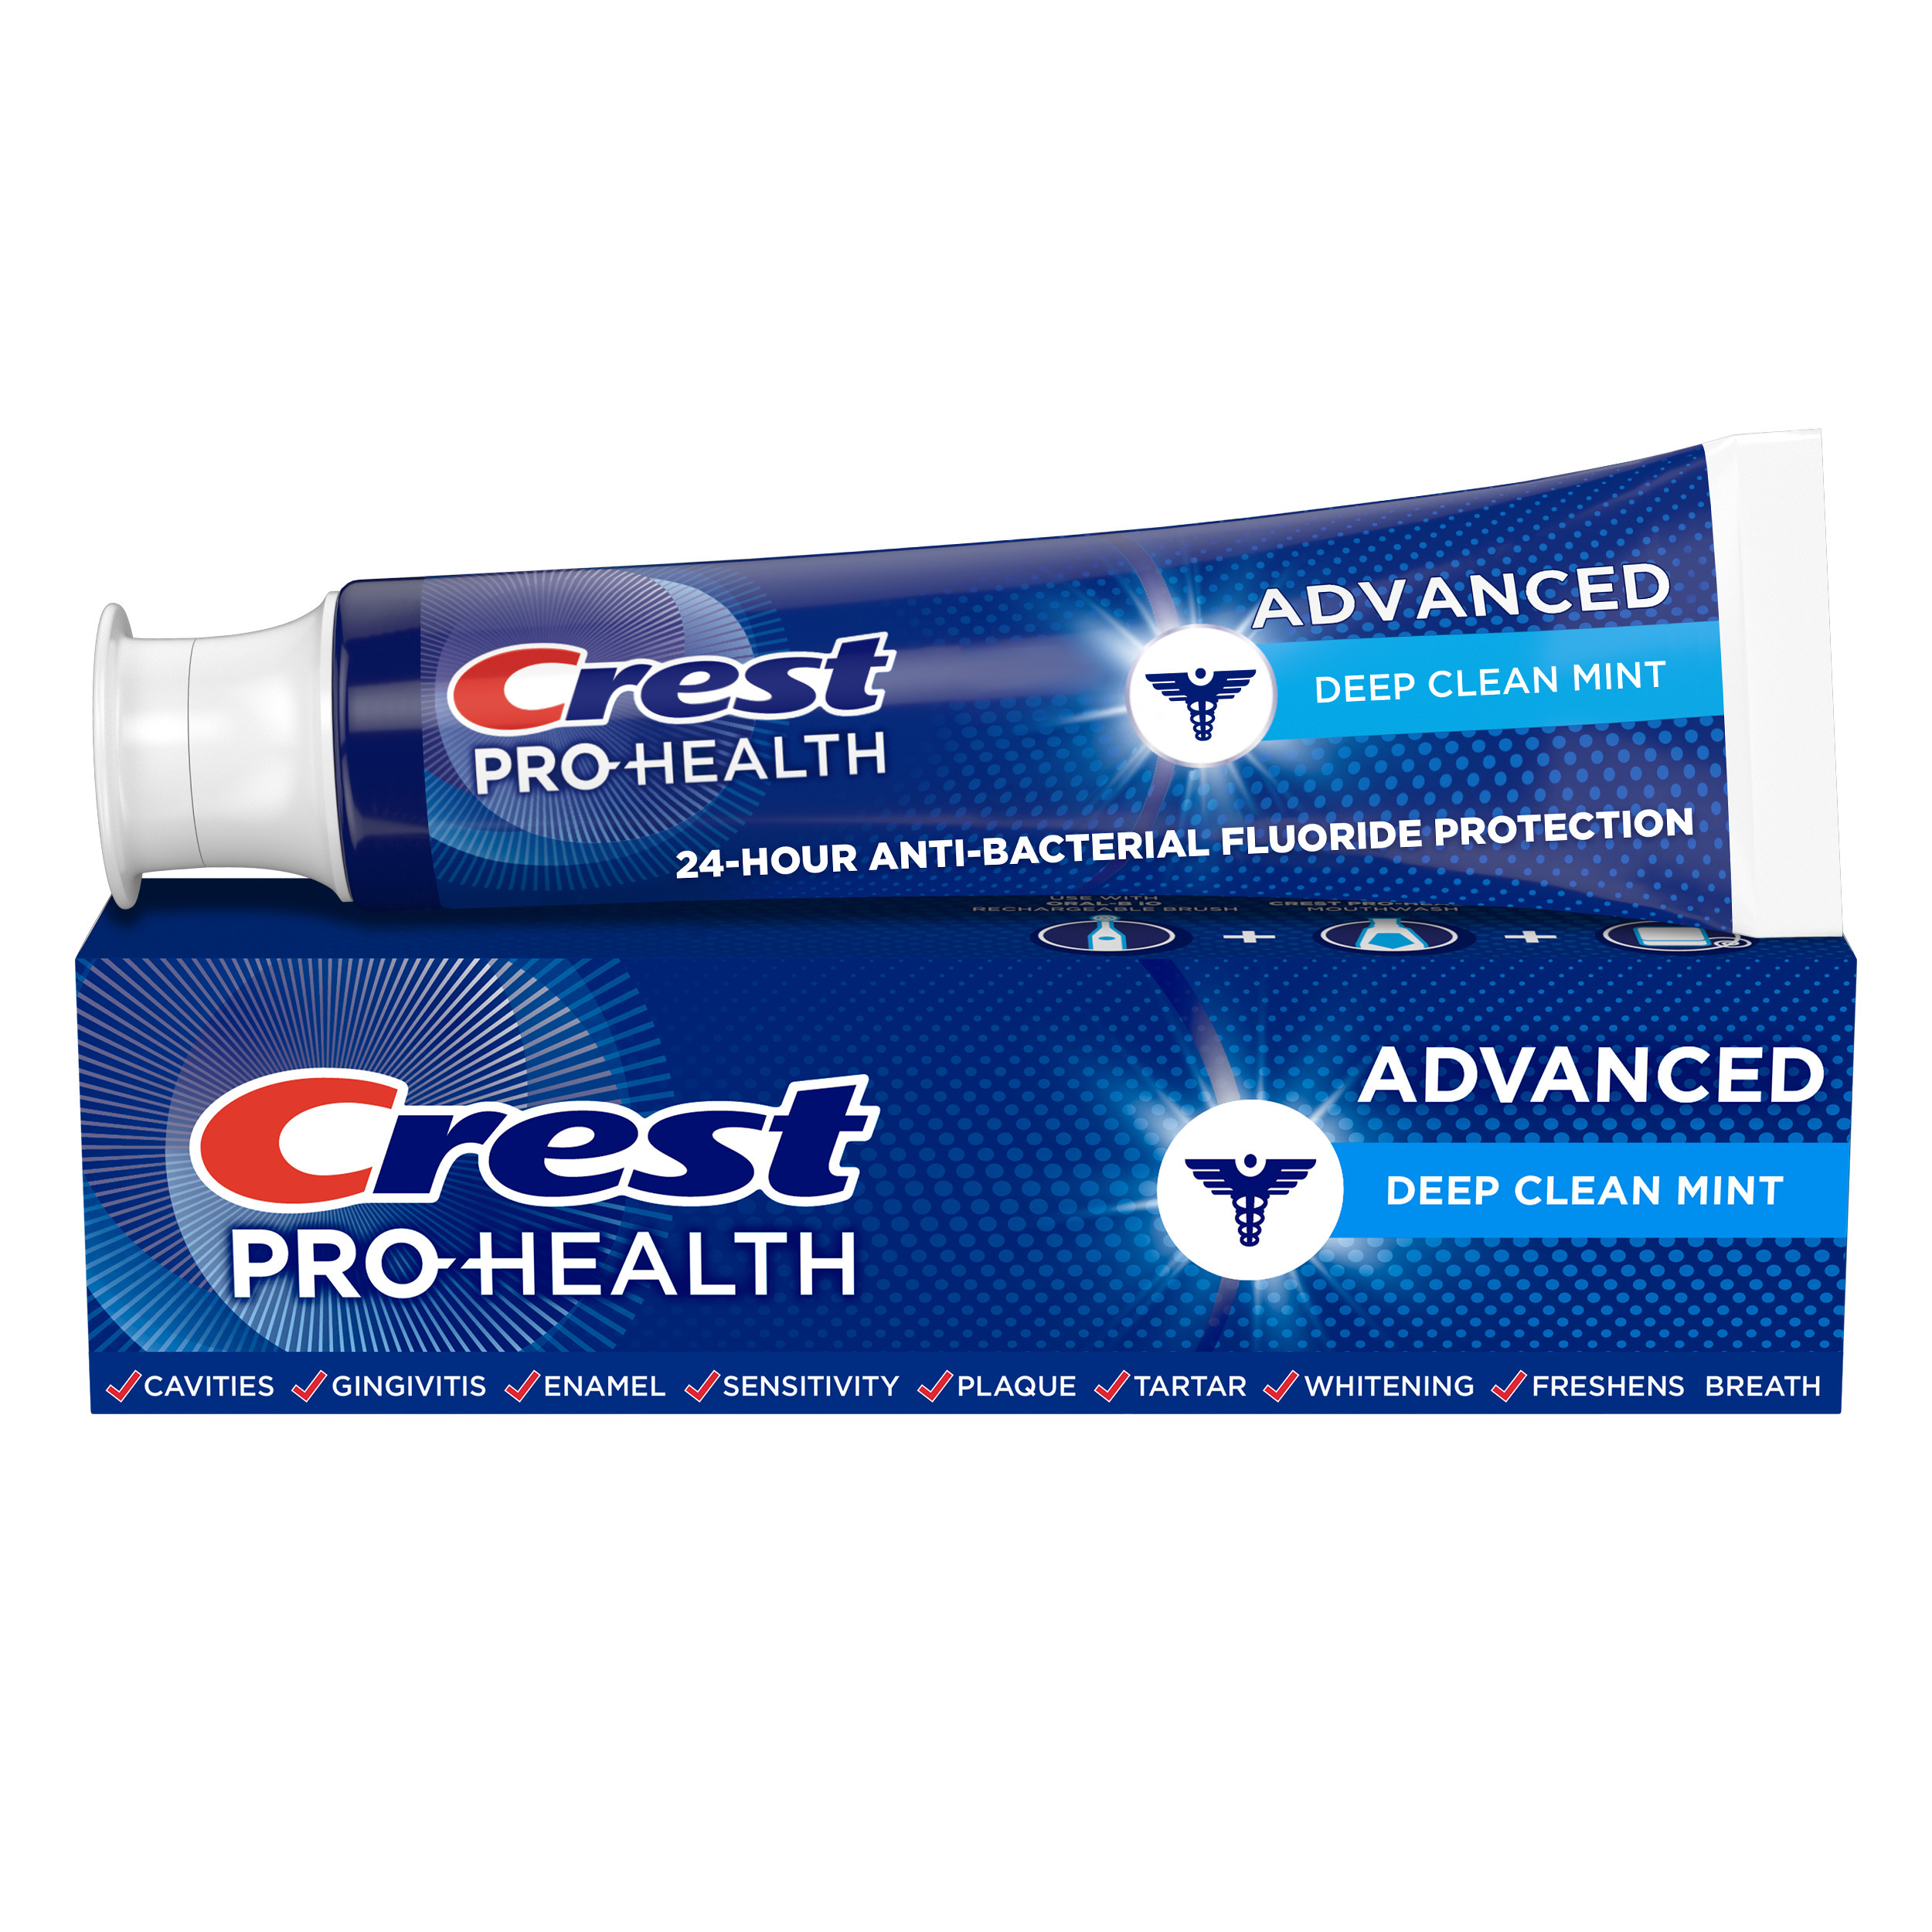 Crest Pro Health Advanced Deep Clean Toothpaste, Mint, 3.5 oz - image 1 of 8